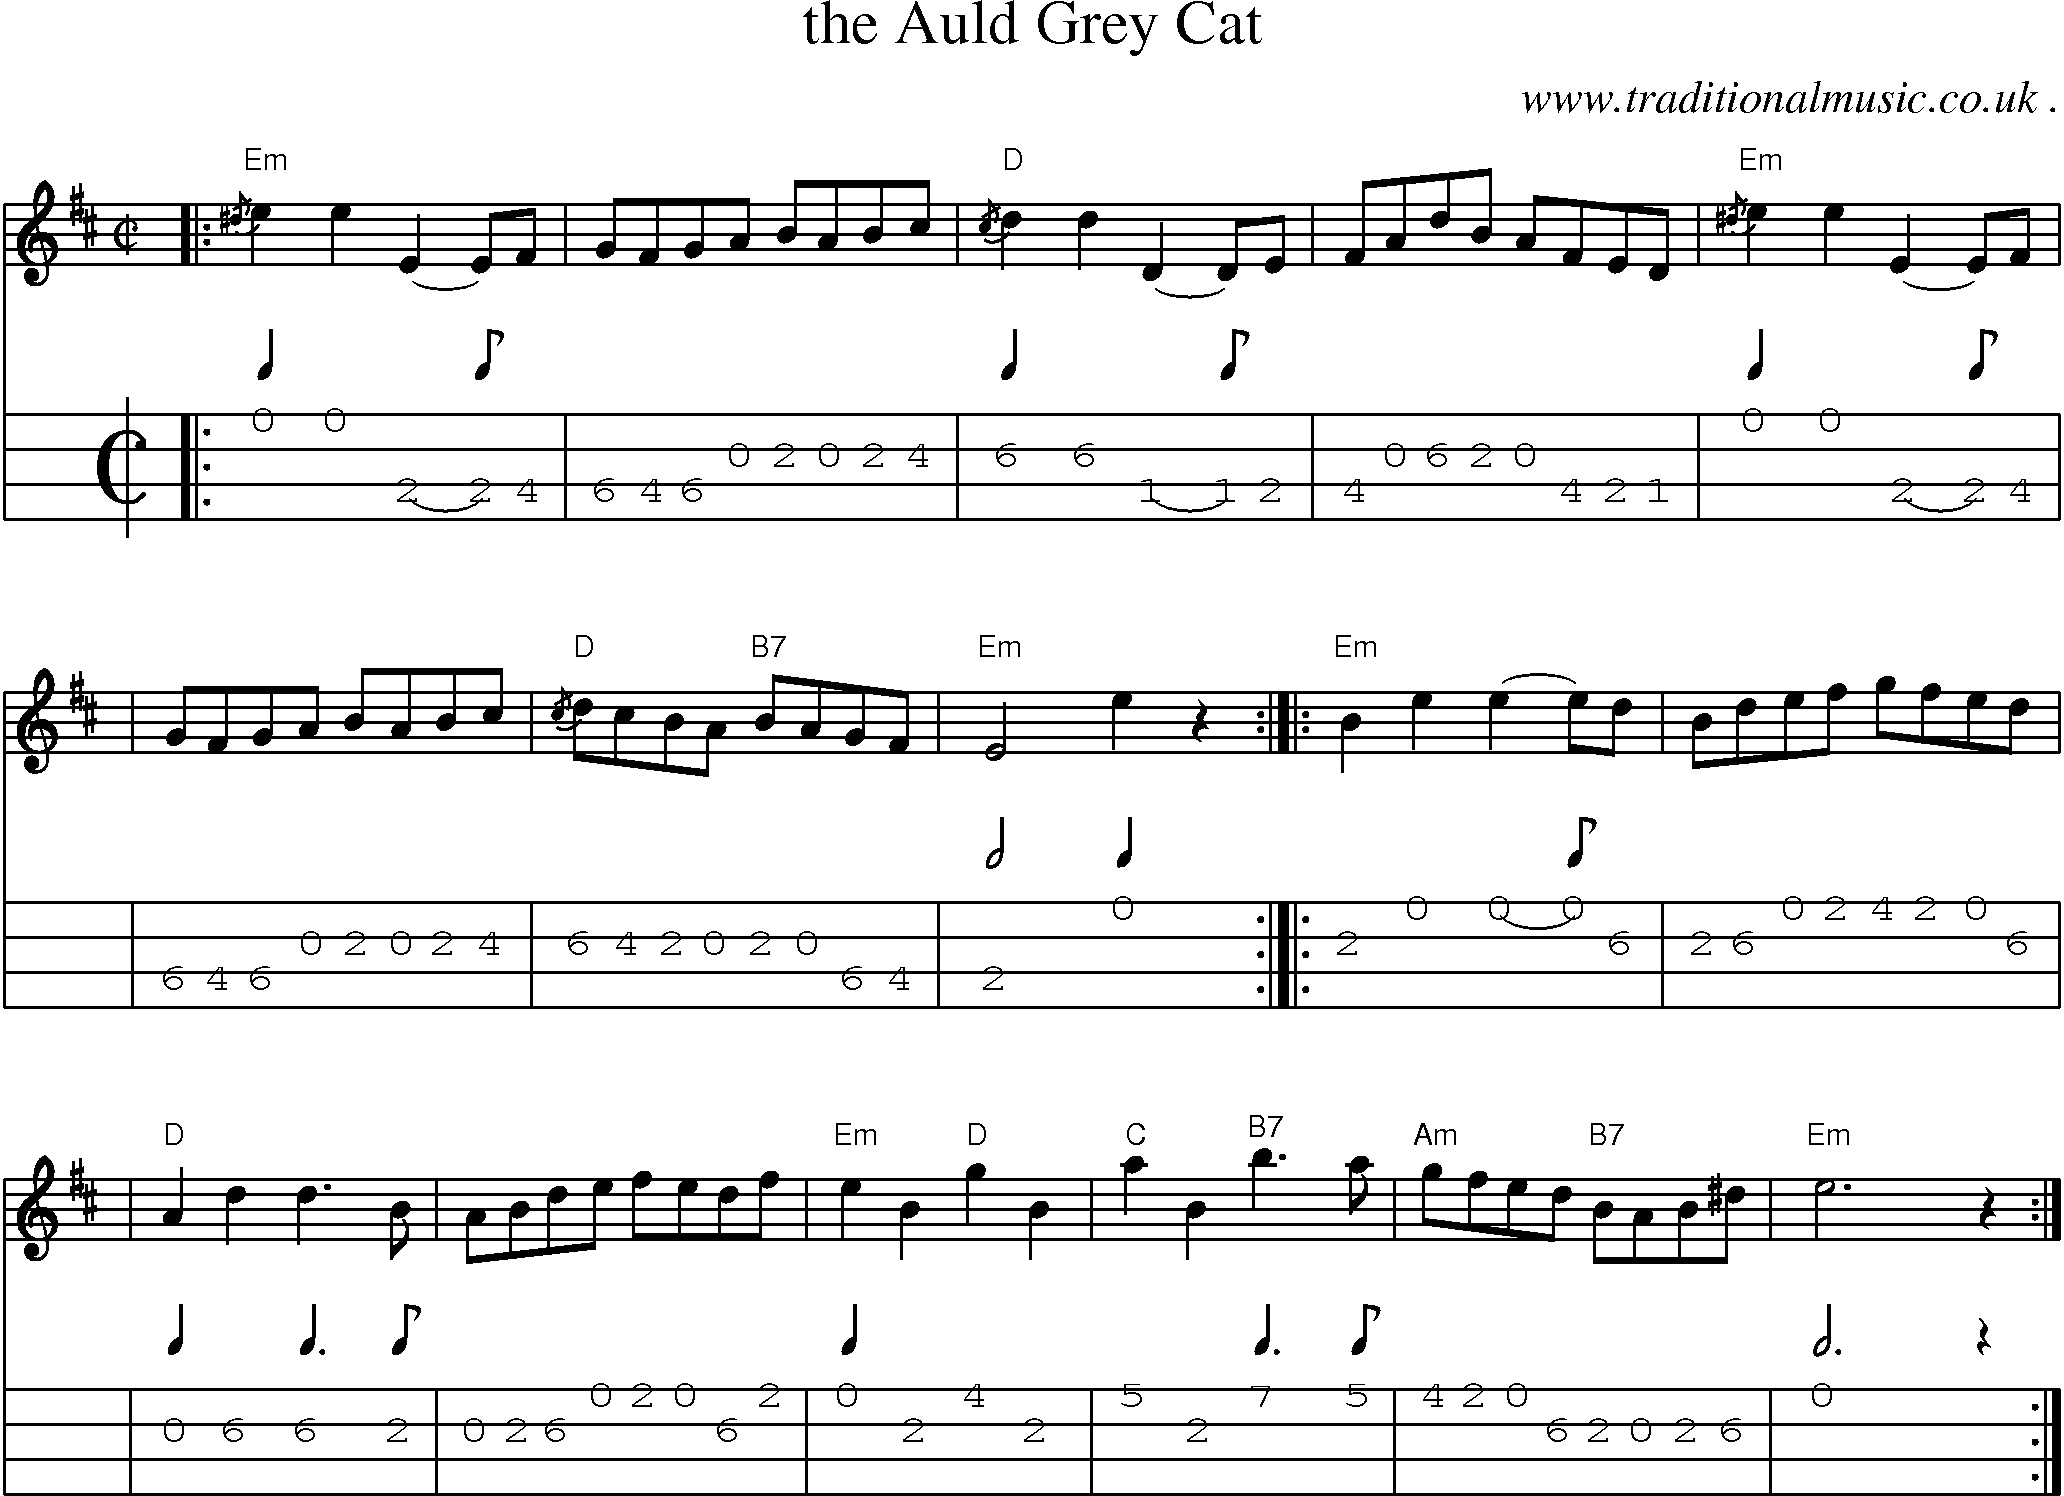 Sheet-music  score, Chords and Mandolin Tabs for The Auld Grey Cat